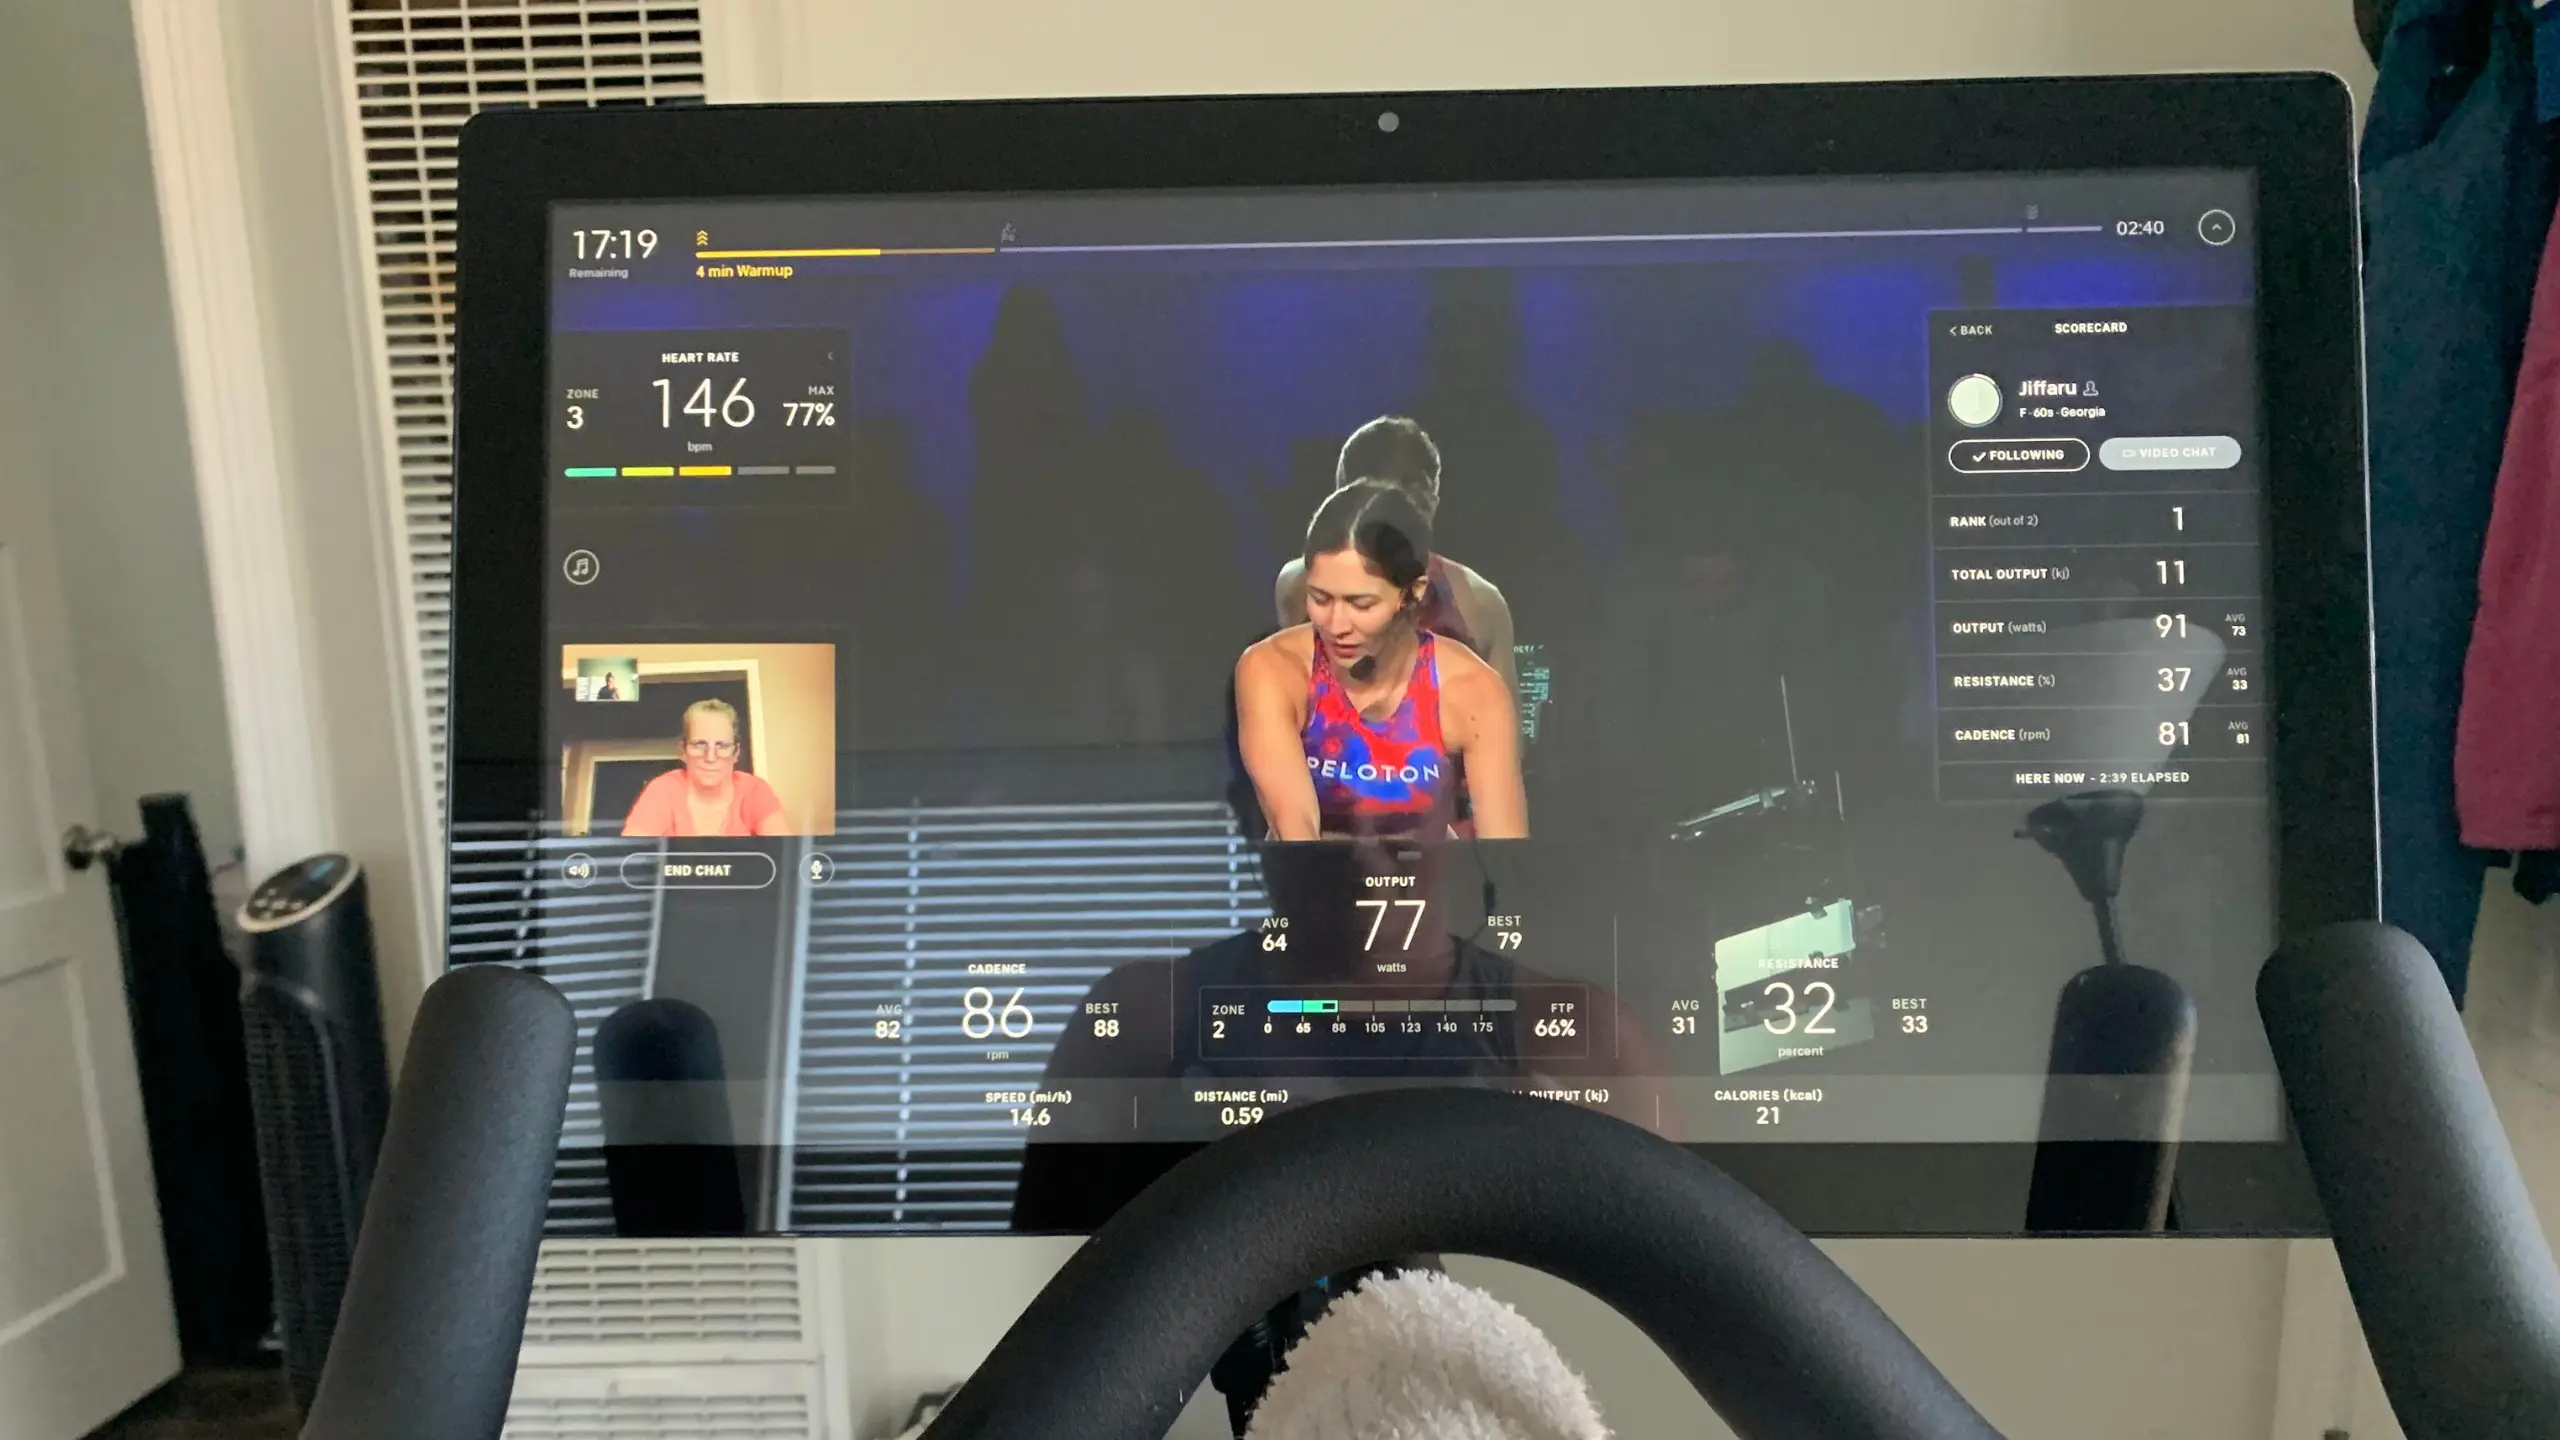 Why Use Peloton’s Video Chat Feature